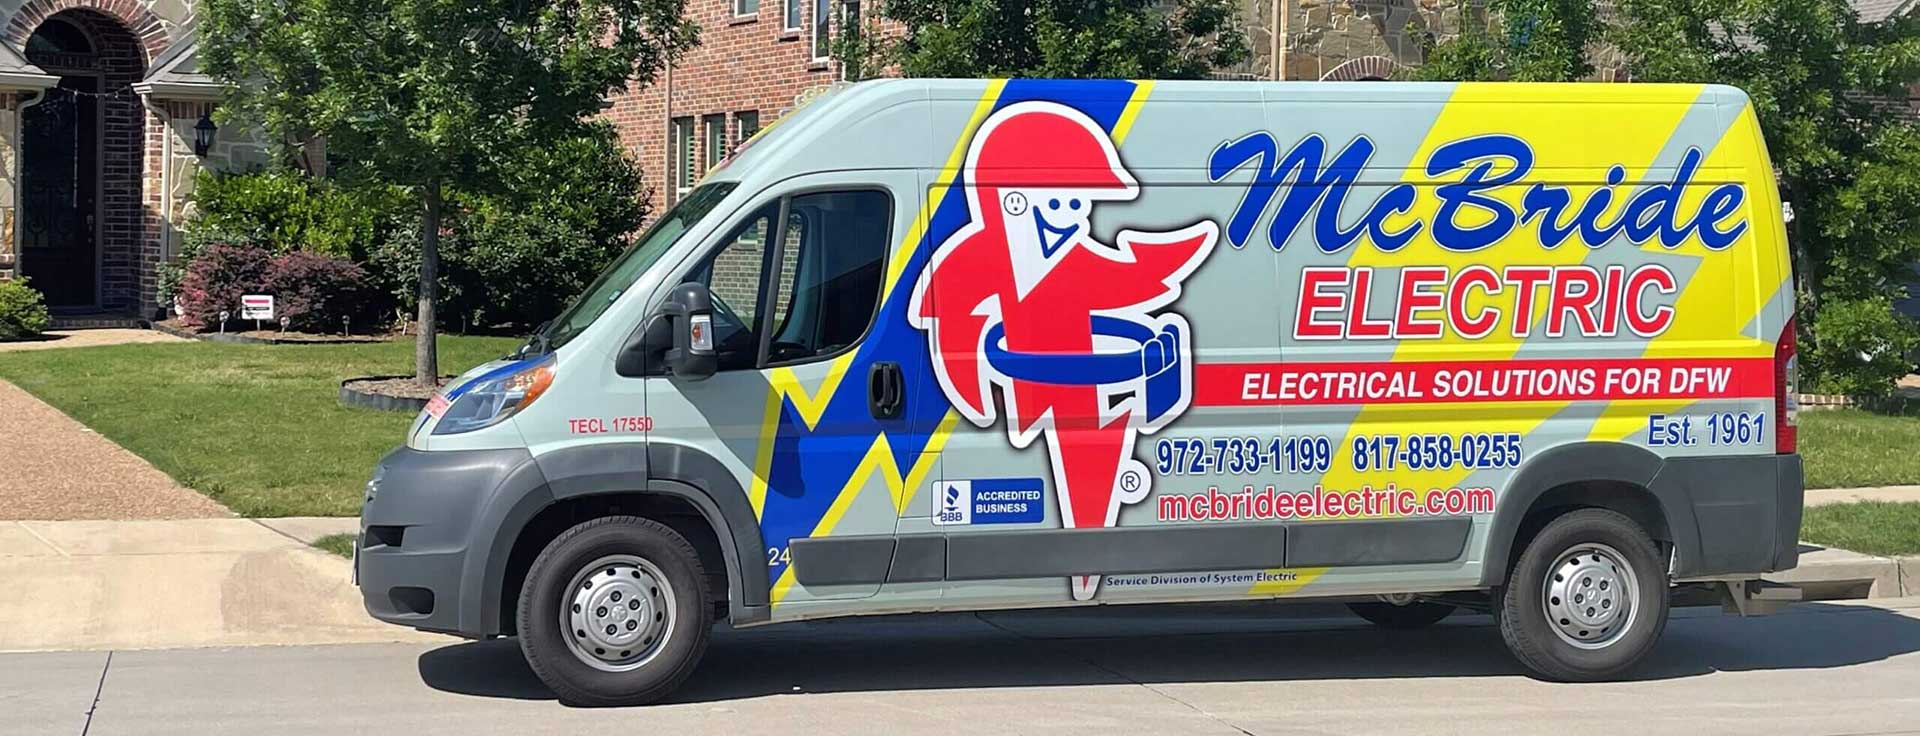 Electrical Outlet and Panel Replacement, Installation and Upgrade Services Plano DFW Truck